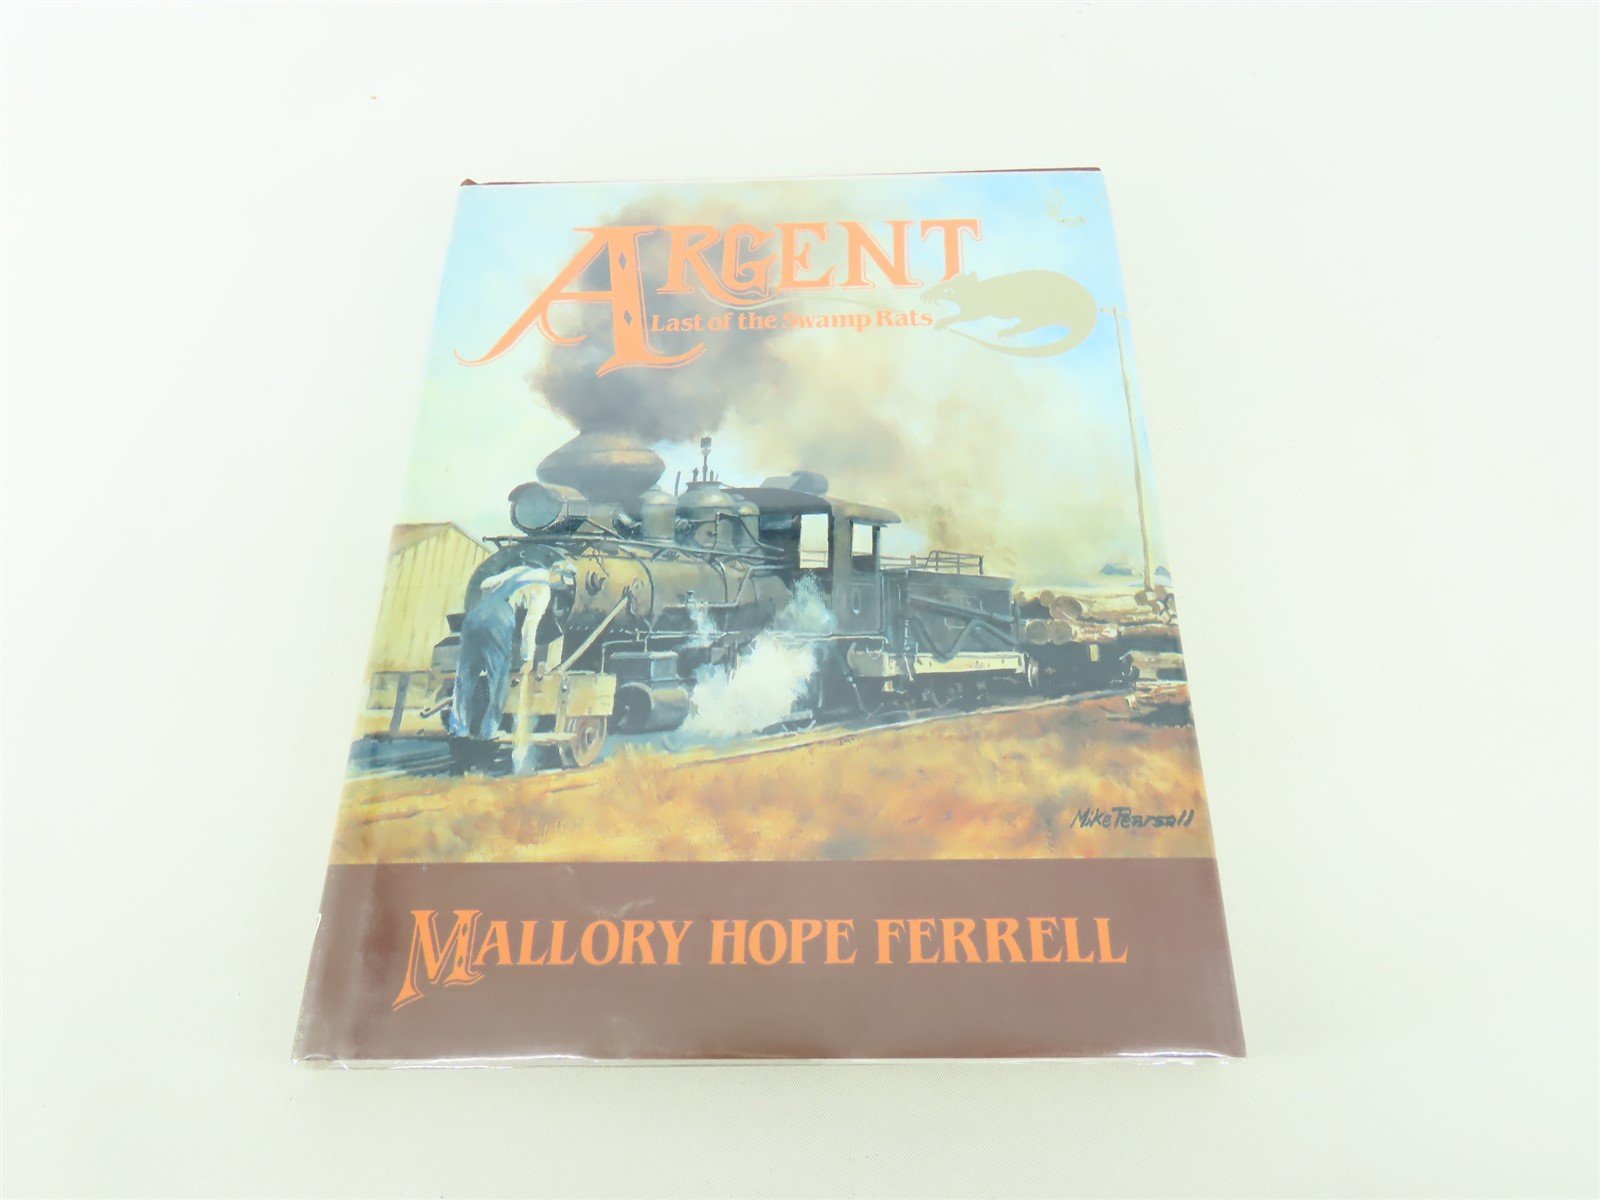 Argent Last Of The Swamp Rats by Mallory Hope Ferrell ©1994 HC Book